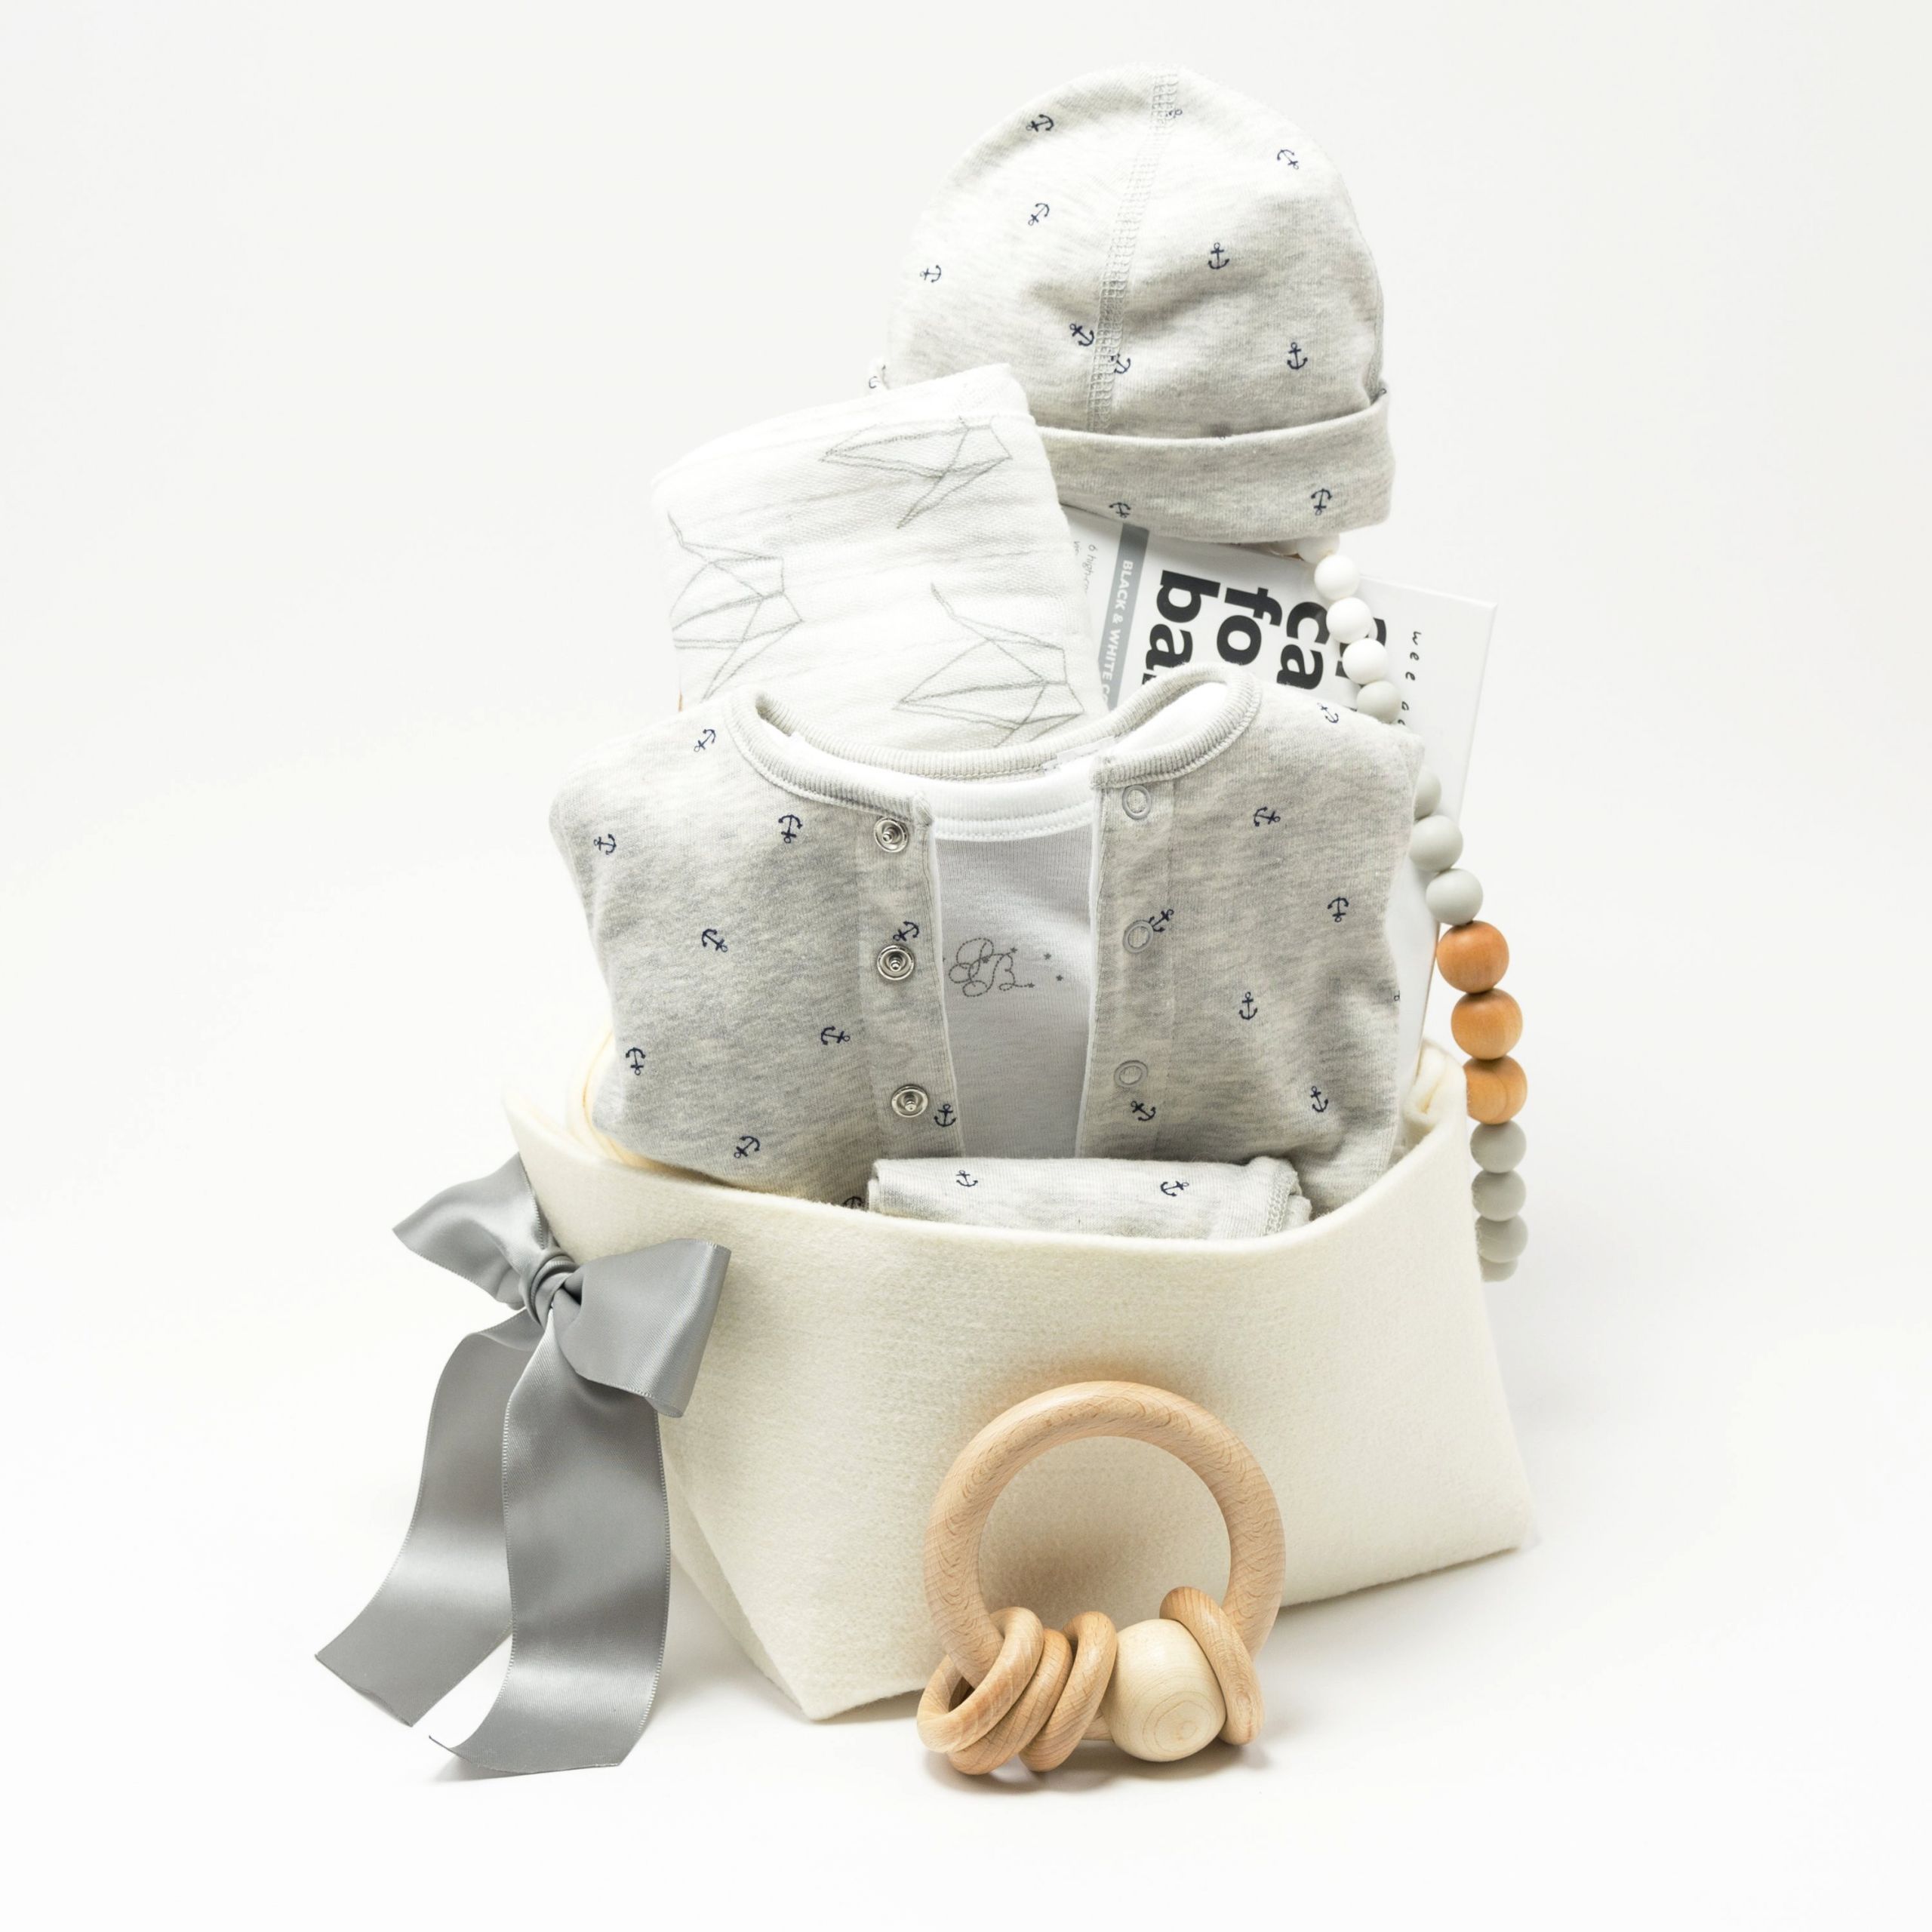 Luxury Personalized Baby Gifts
 New Arrivals Unique selection of fabulous designer Gifts